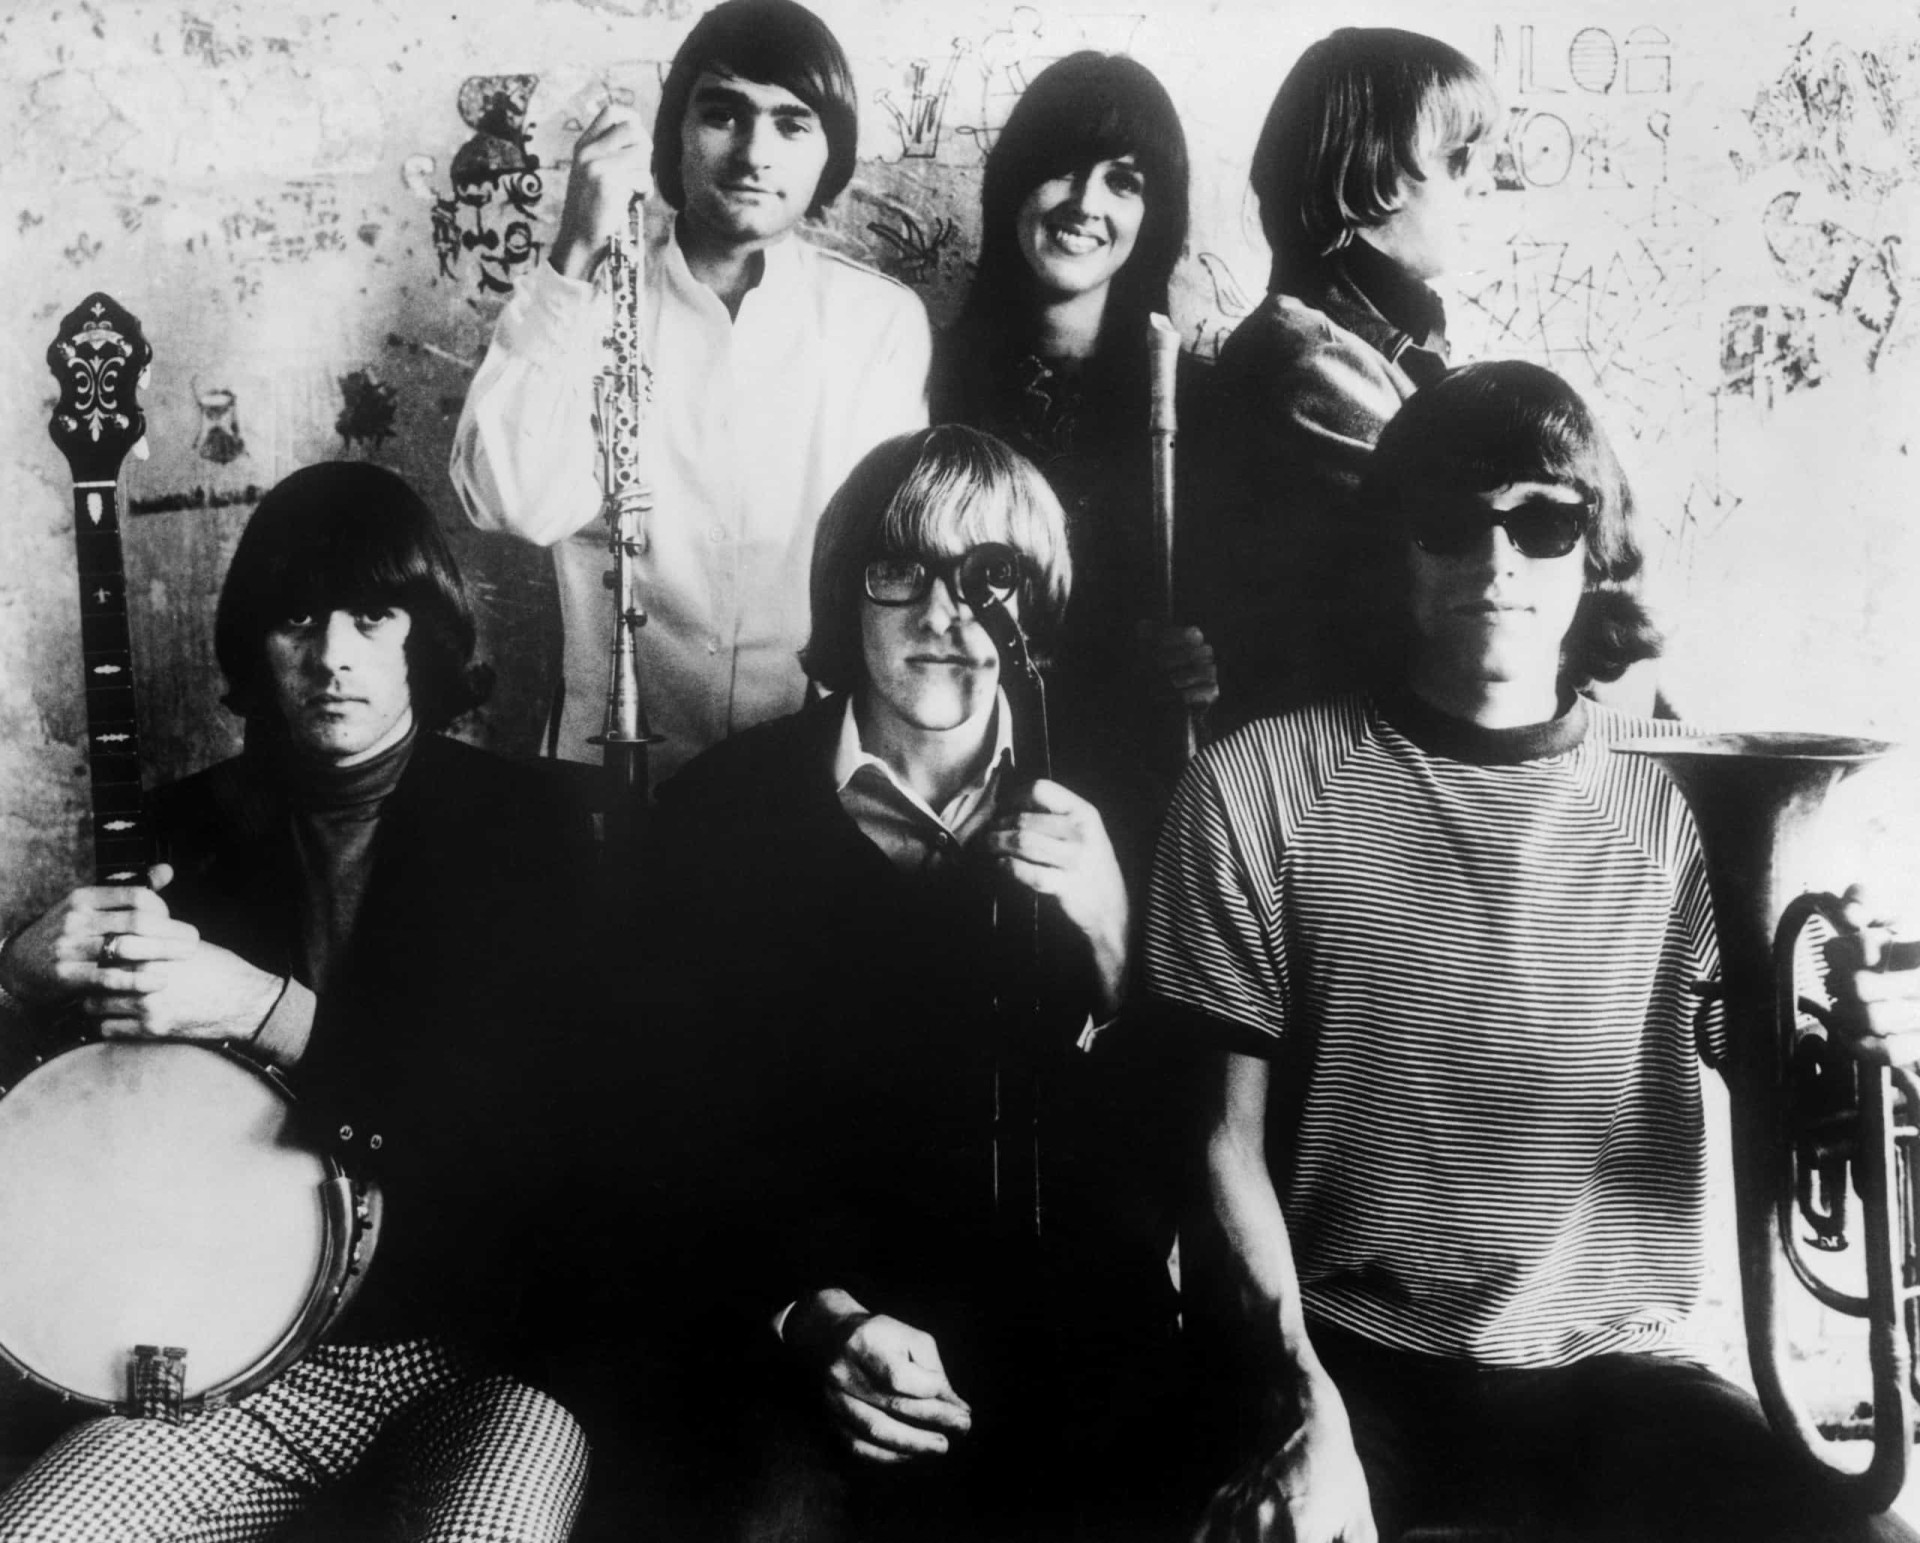 <p>One of the defining songs of the late 1960s, 'White Rabbit' was written by Grace Slick and recorded by Jefferson Airplane in November 1966. The lyrics draw on imagery from the <a href="https://www.starsinsider.com/lifestyle/506439/famous-authors-and-their-pen-names" rel="noopener">Lewis Carroll</a> books 'Alice's Adventures in Wonderland' and 'Through the Looking-Glass.'</p><p><a href="https://www.msn.com/en-my/community/channel/vid-7xx8mnucu55yw63we9va2gwr7uihbxwc68fxqp25x6tg4ftibpra?cvid=94631541bc0f4f89bfd59158d696ad7e">Follow us and access great exclusive content every day</a></p>